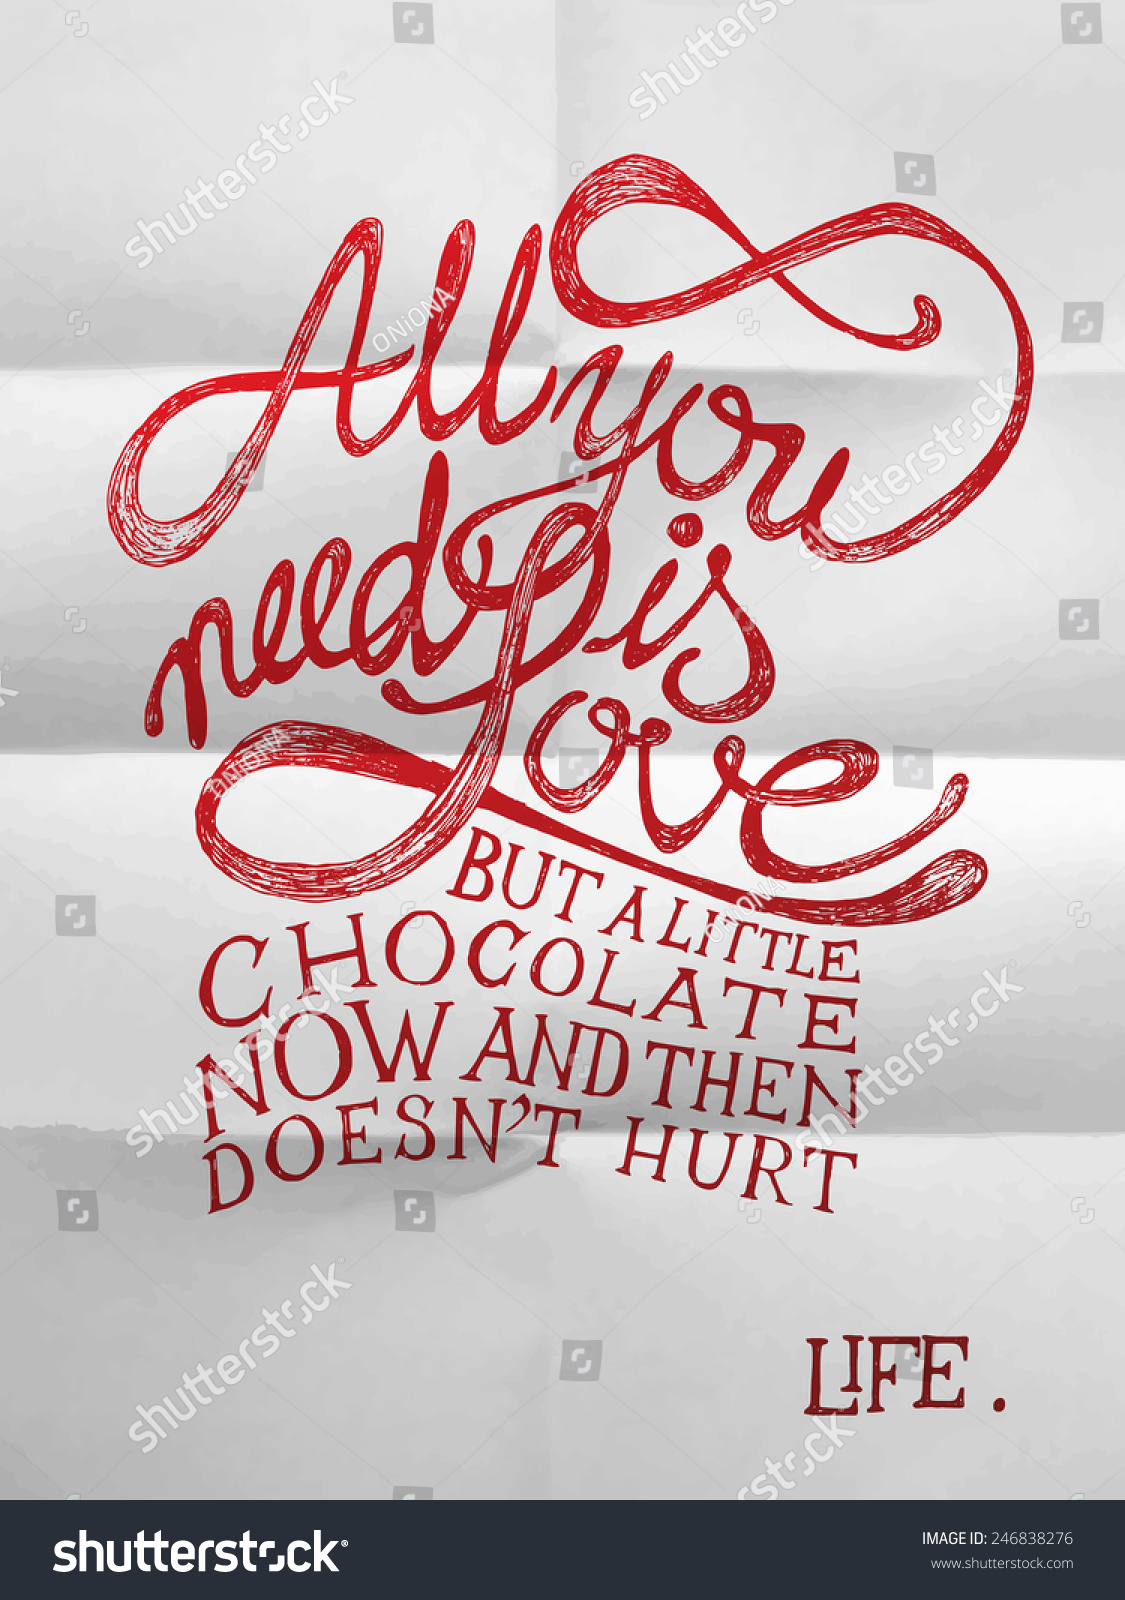 All You need is Love but a little chocolate now and then doesn t hurt